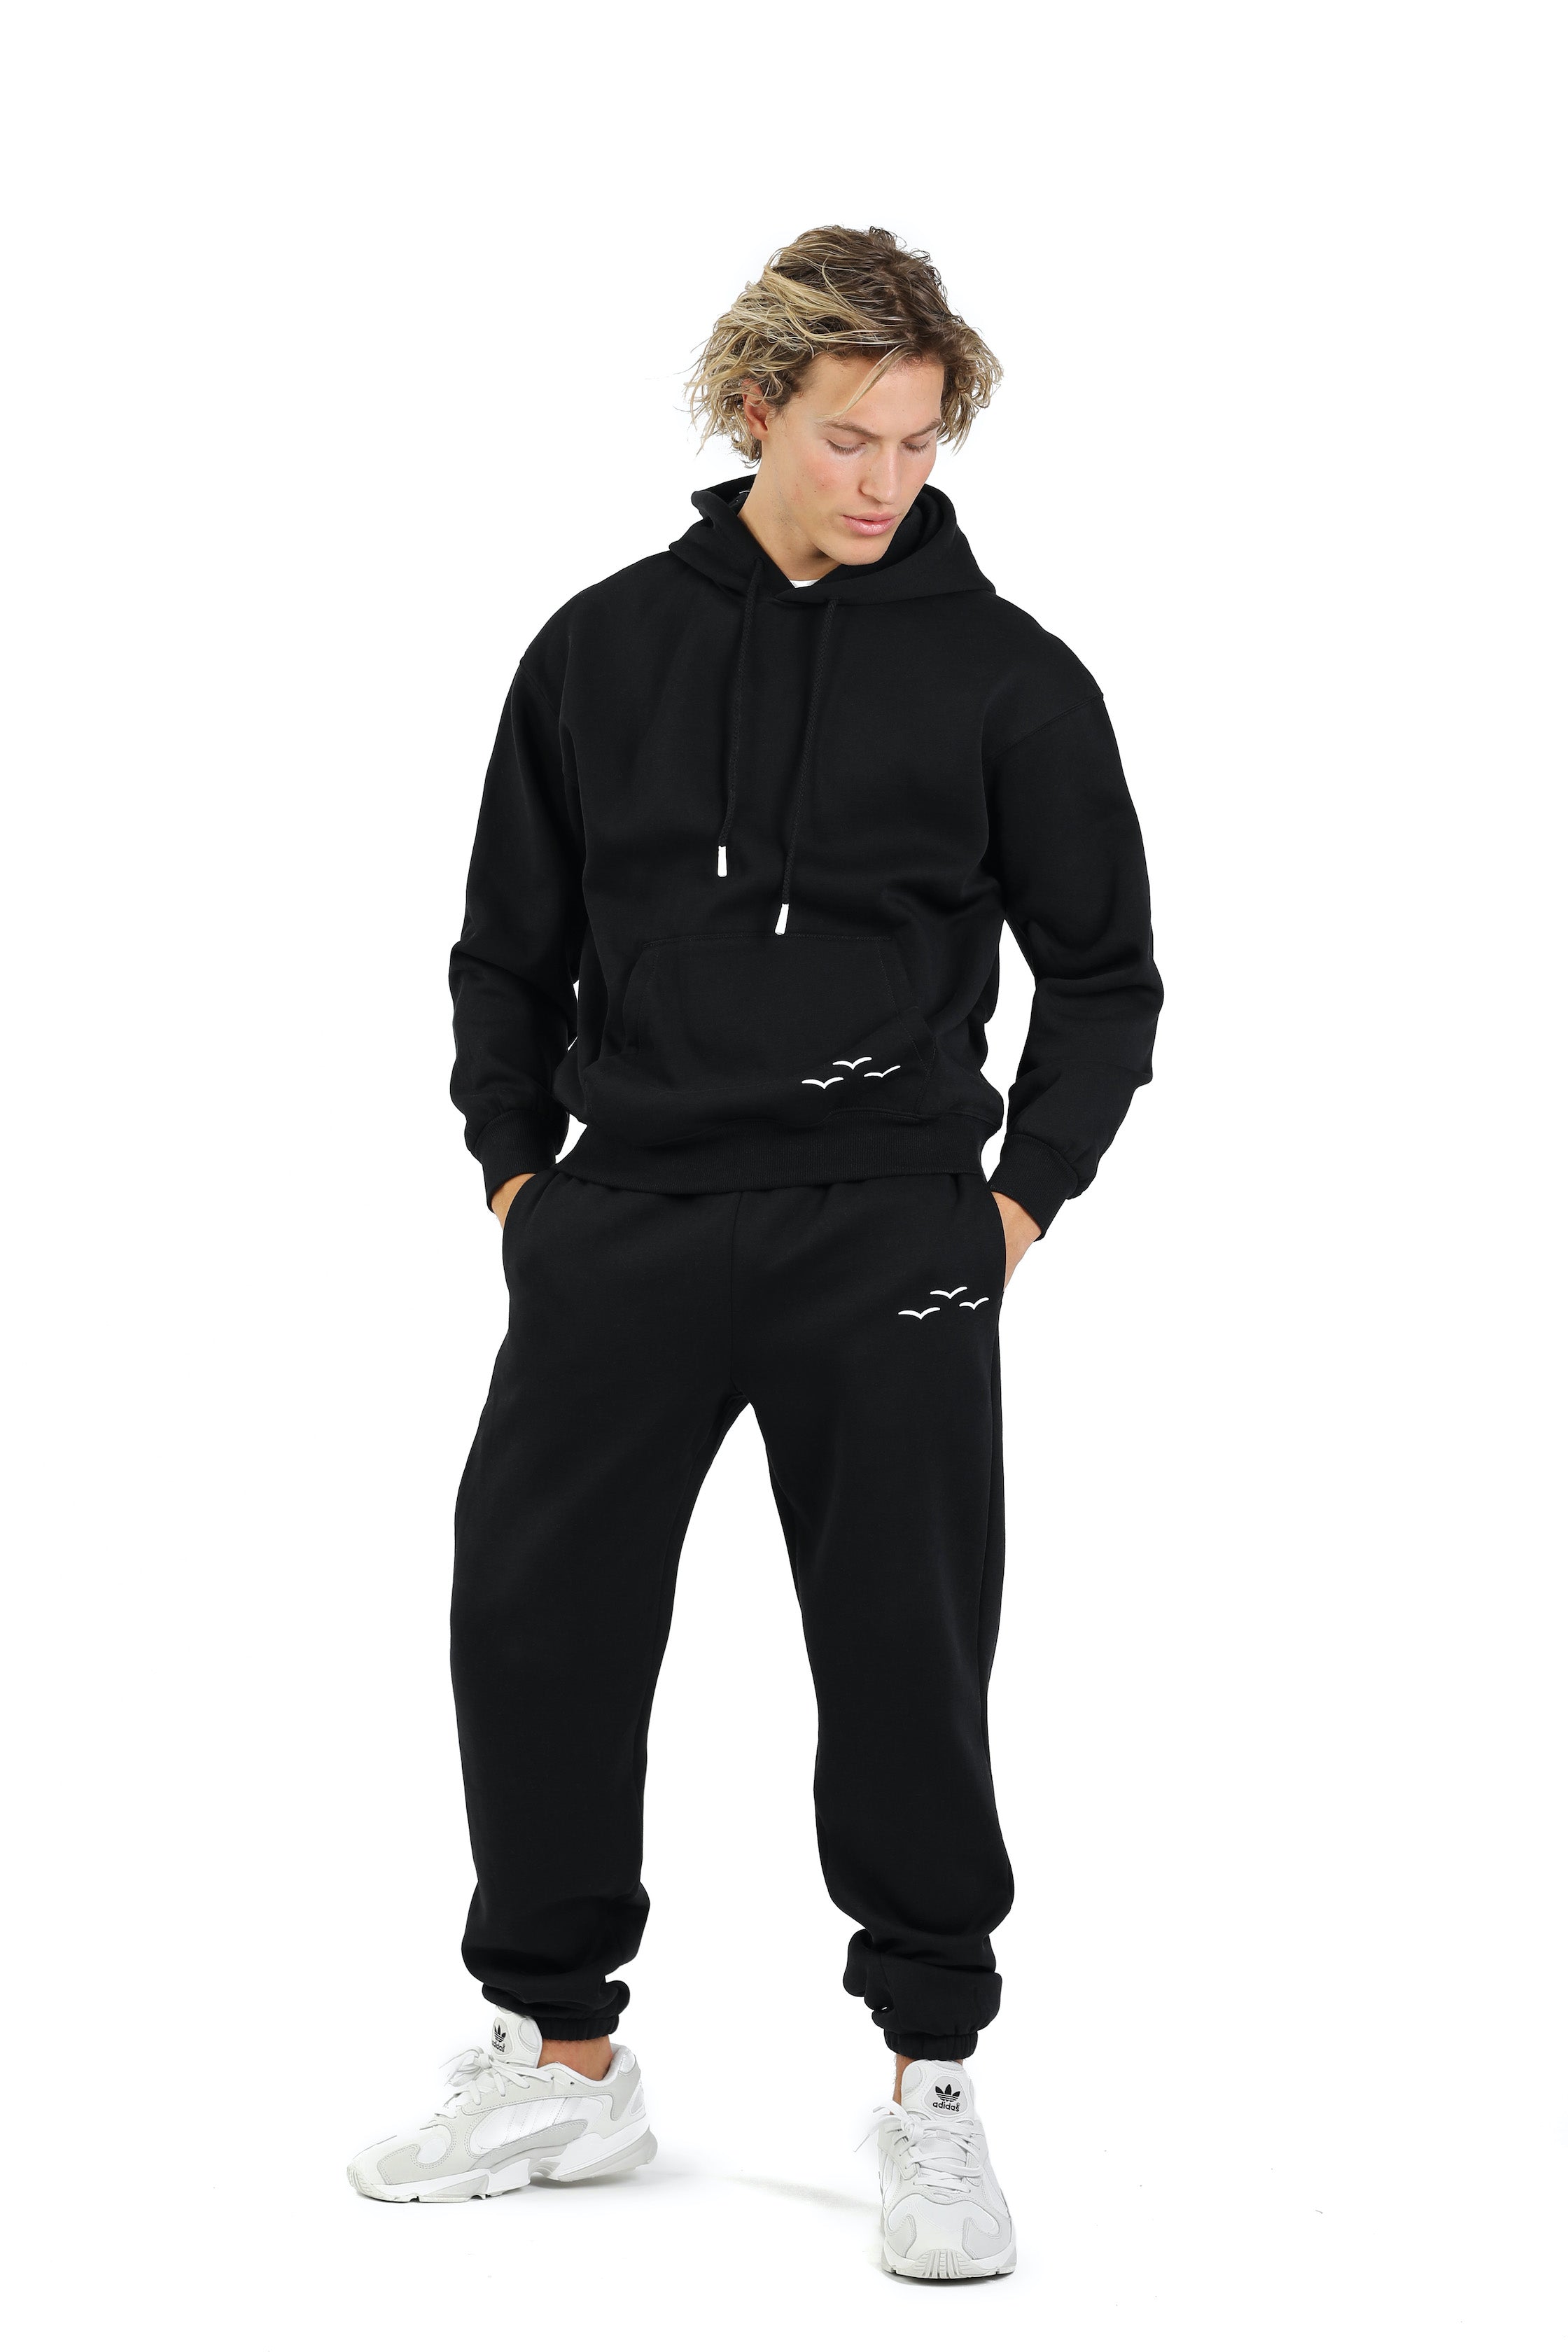 Men's sweatsuit set in black from Lazypants - always a great buy at a reasonable price.